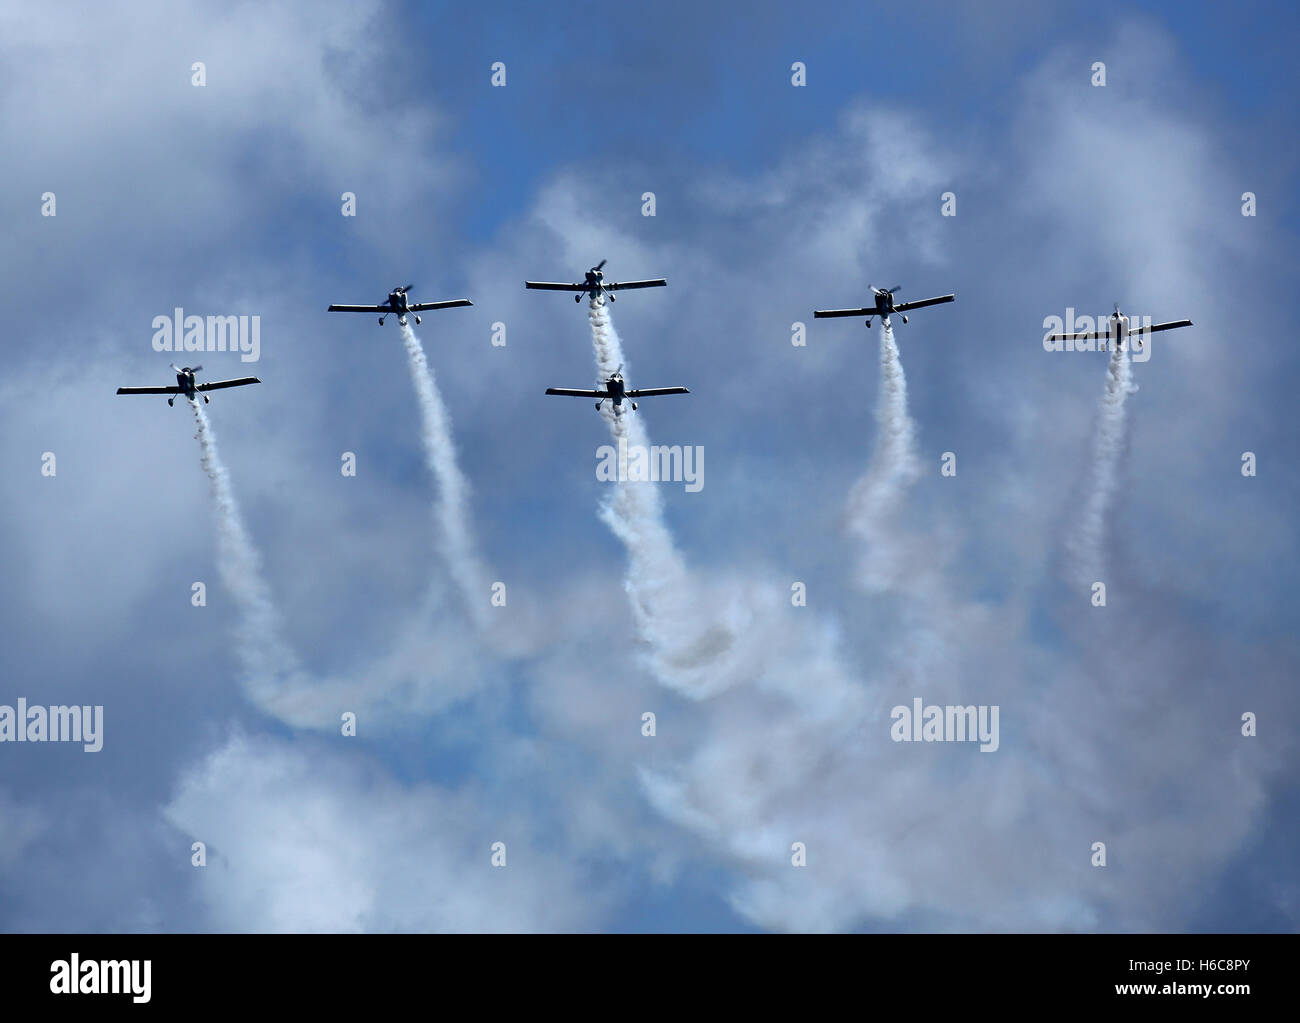 All six Vans aircraft of Team Raven displaying over St. Peter Port, Guernsey. Stock Photo